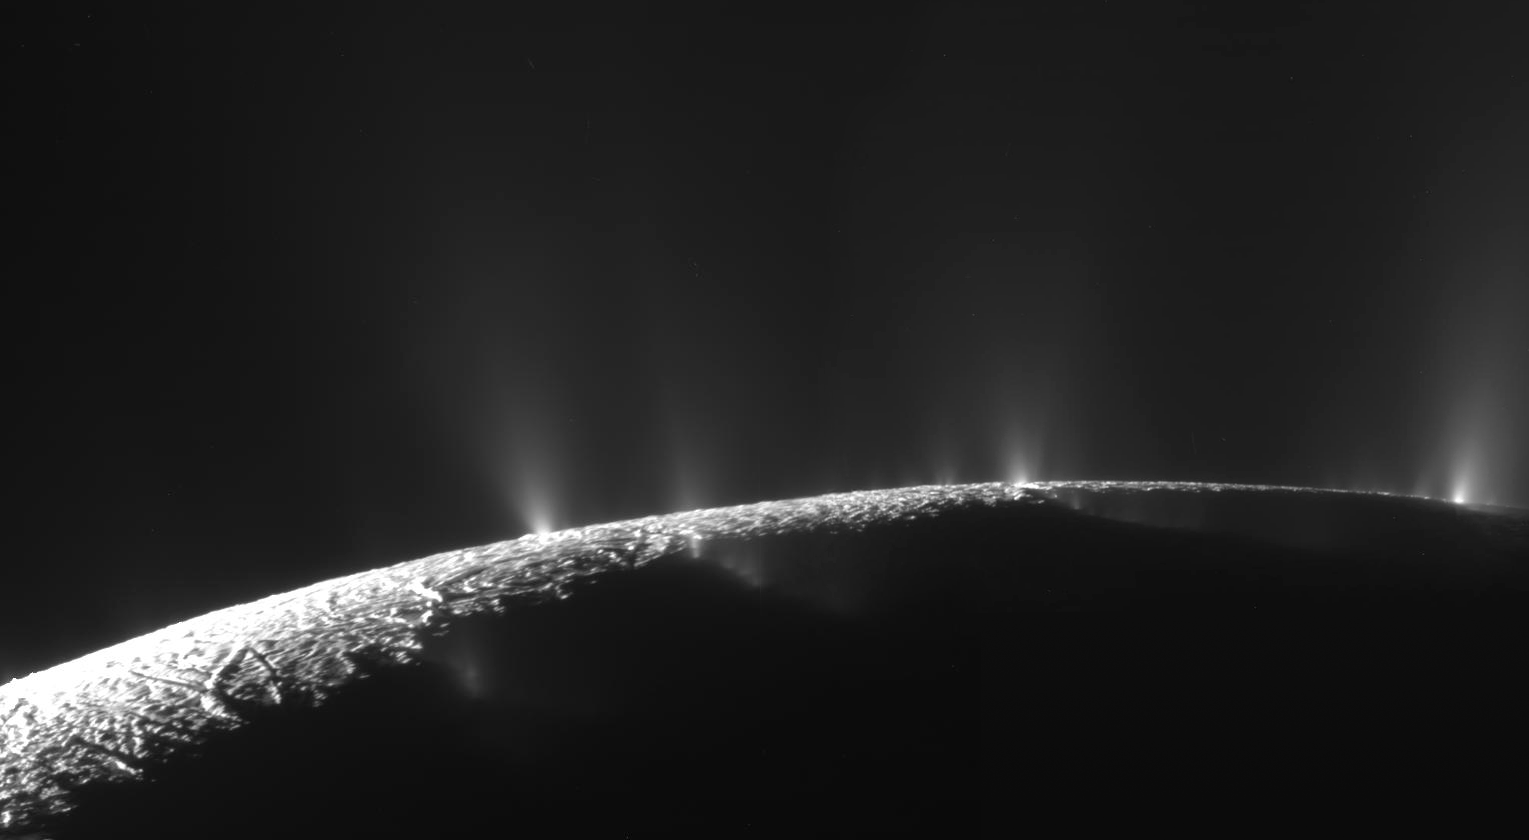 Giant Plumes Of Ice As Photographed By The Cassini Spacecraft During A